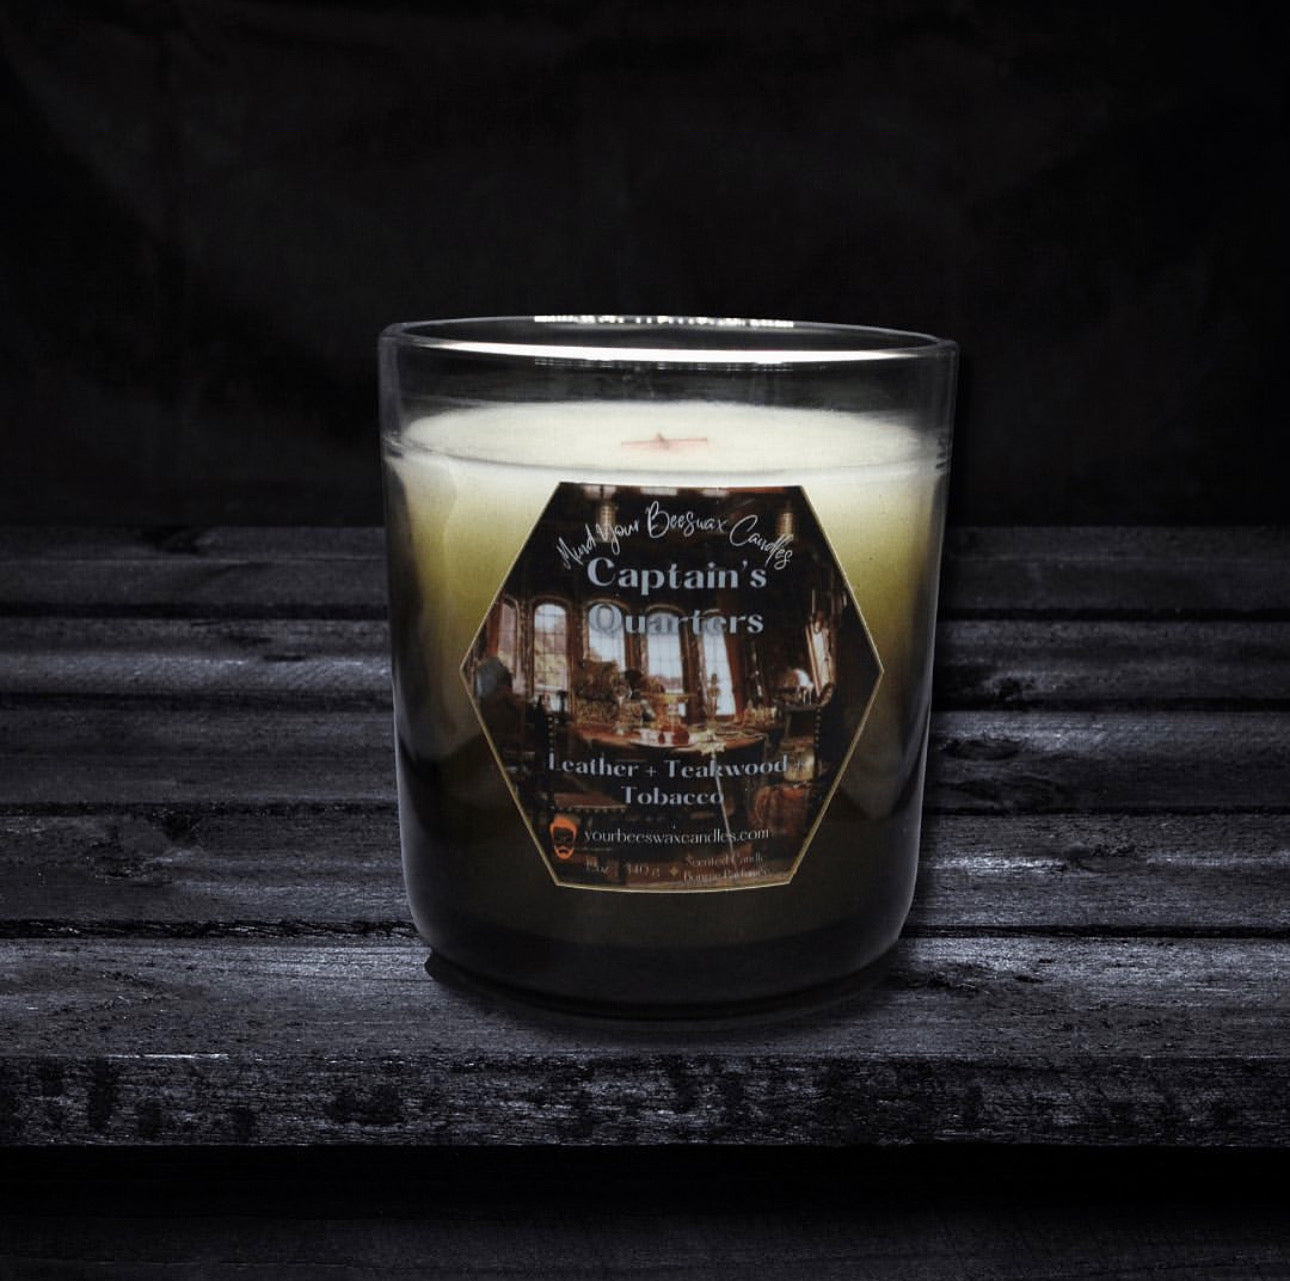 A depiction of the Captain's Quarters Luxury Beeswax Candle. The candle is elegantly presented, with a label showcasing the scent name. Its flickering flame casts a cozy glow, reminiscent of a maritime ambiance.